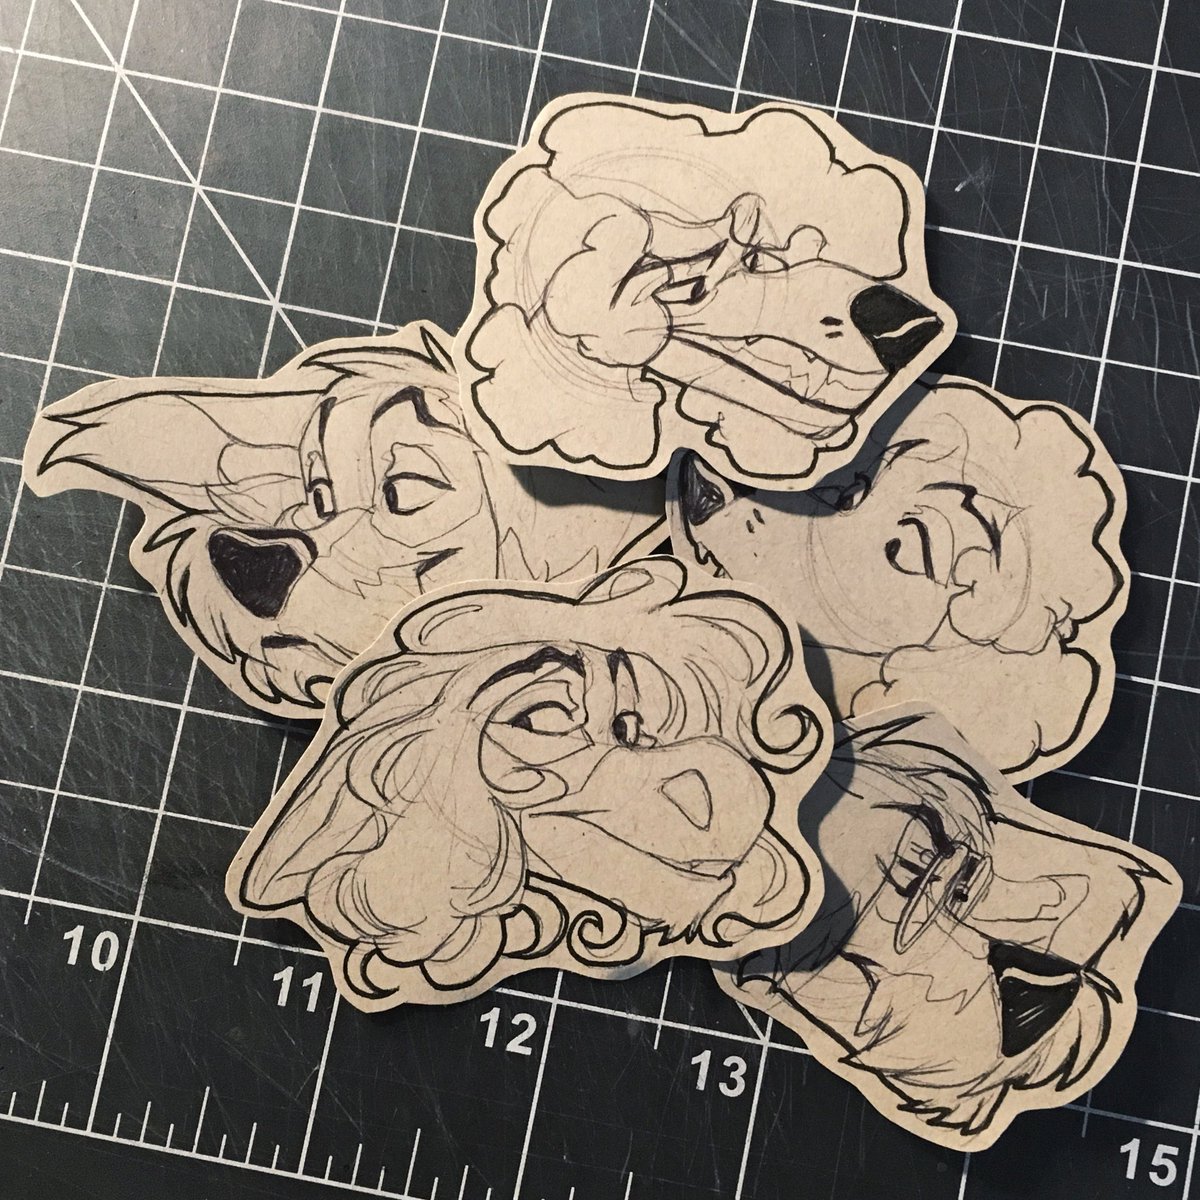 making little hand drawn original stickers to go in the patreon sticker club packages this month since theyll be going out a little late 